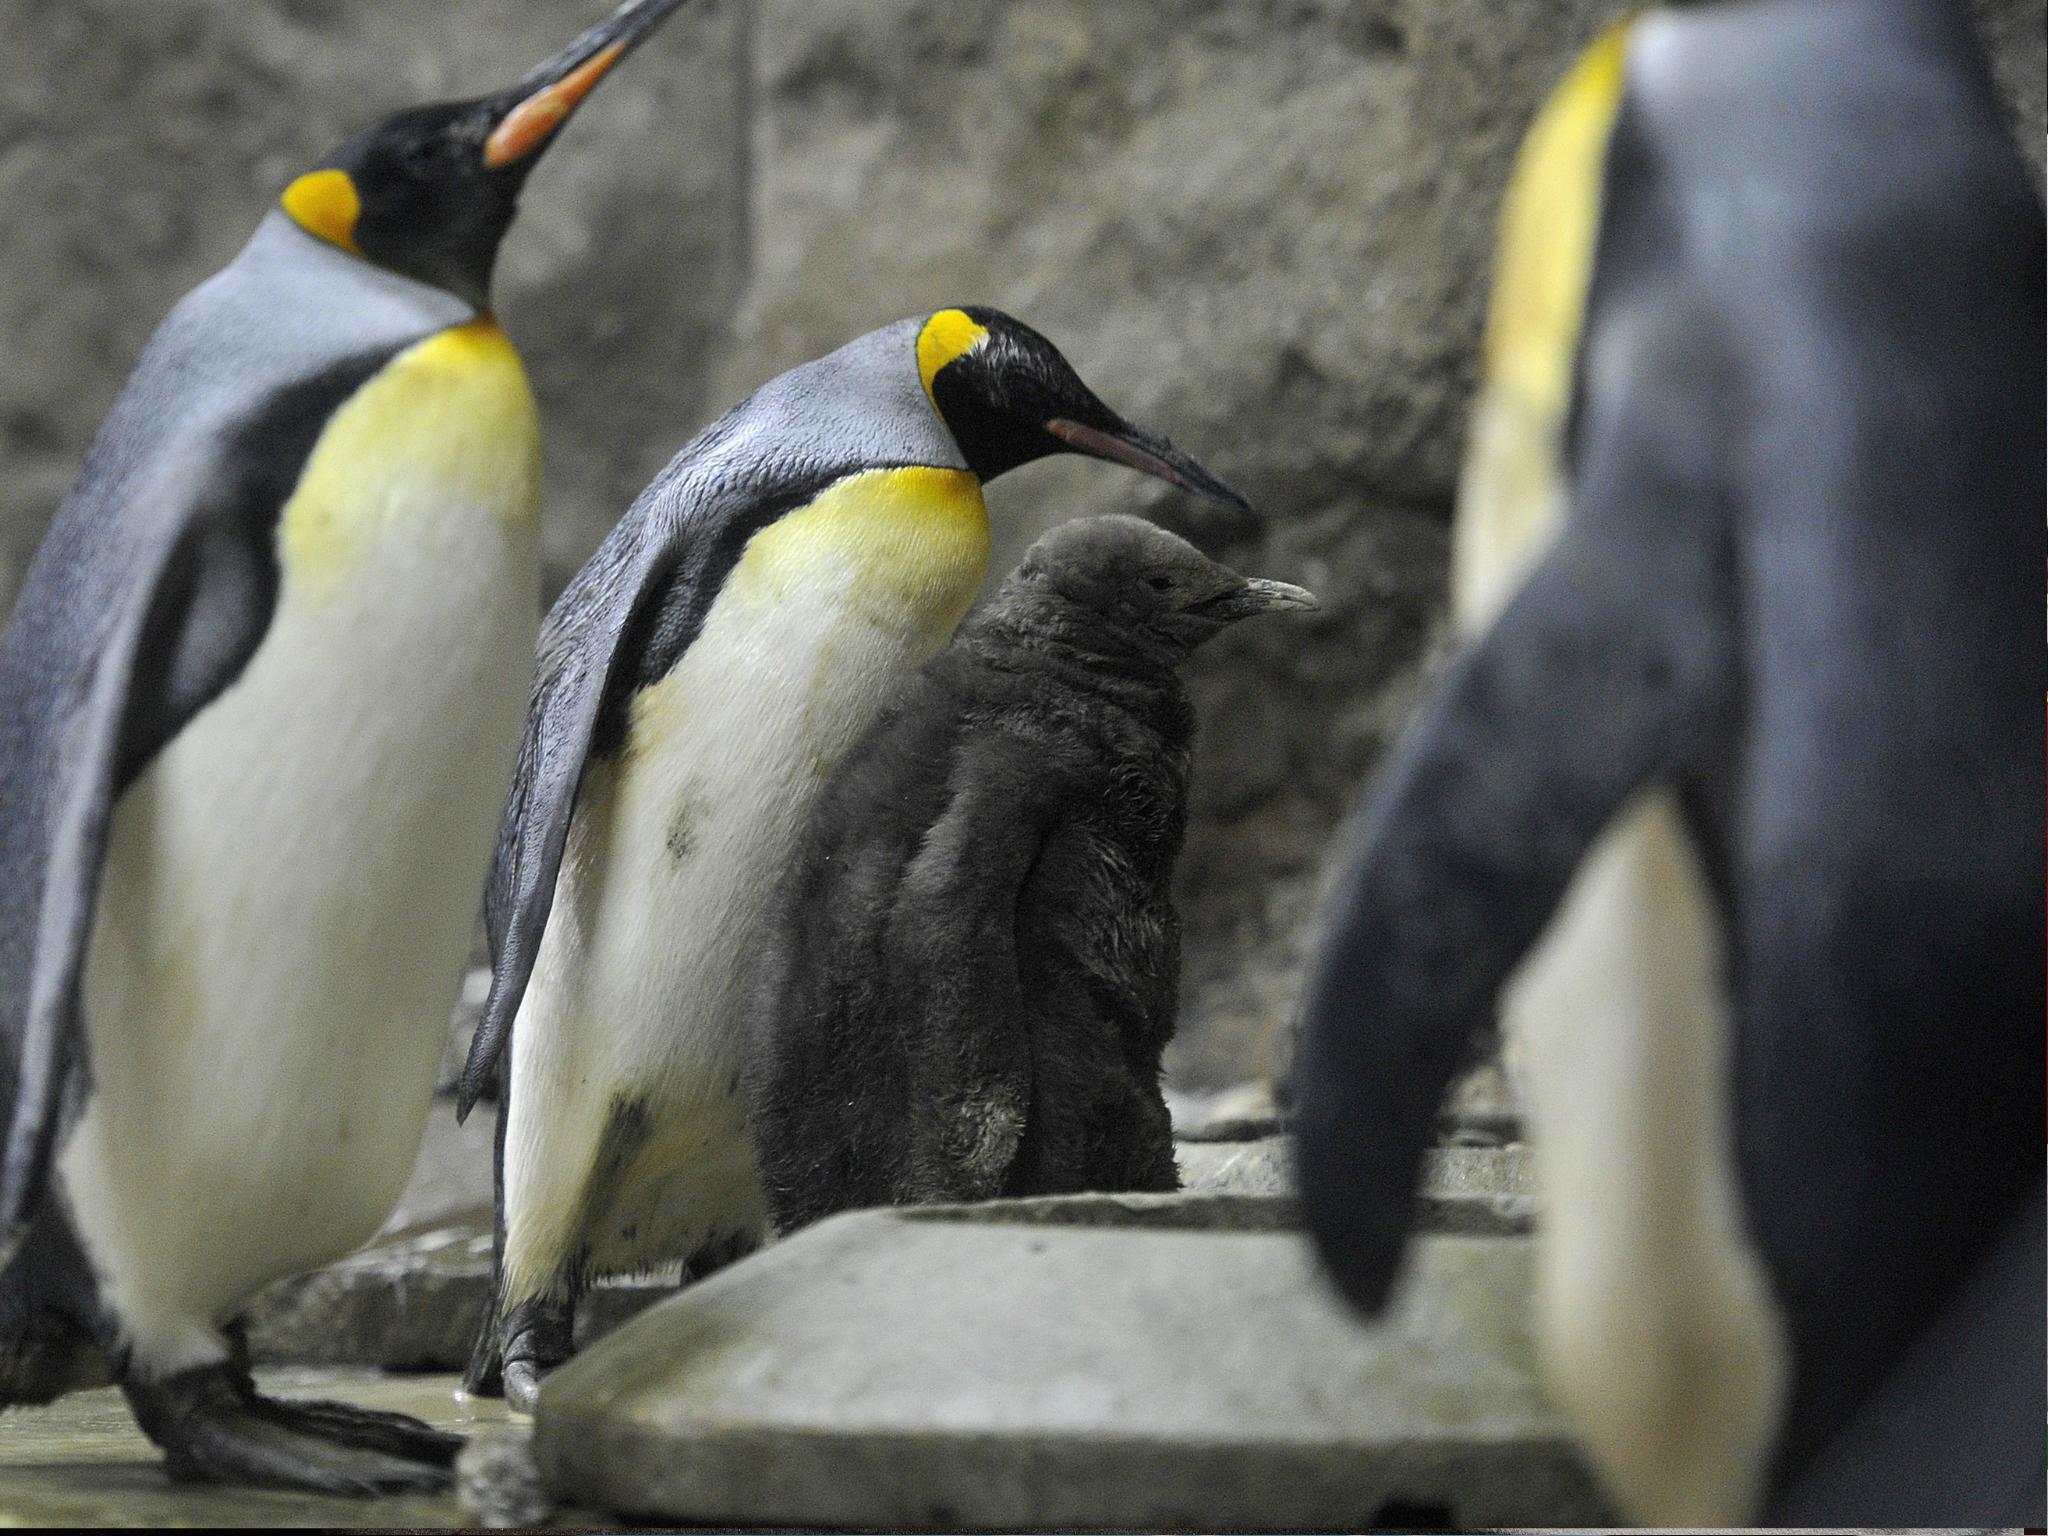 Calgary Zoo in Alberta, Canada, has moved its king penguins indoors